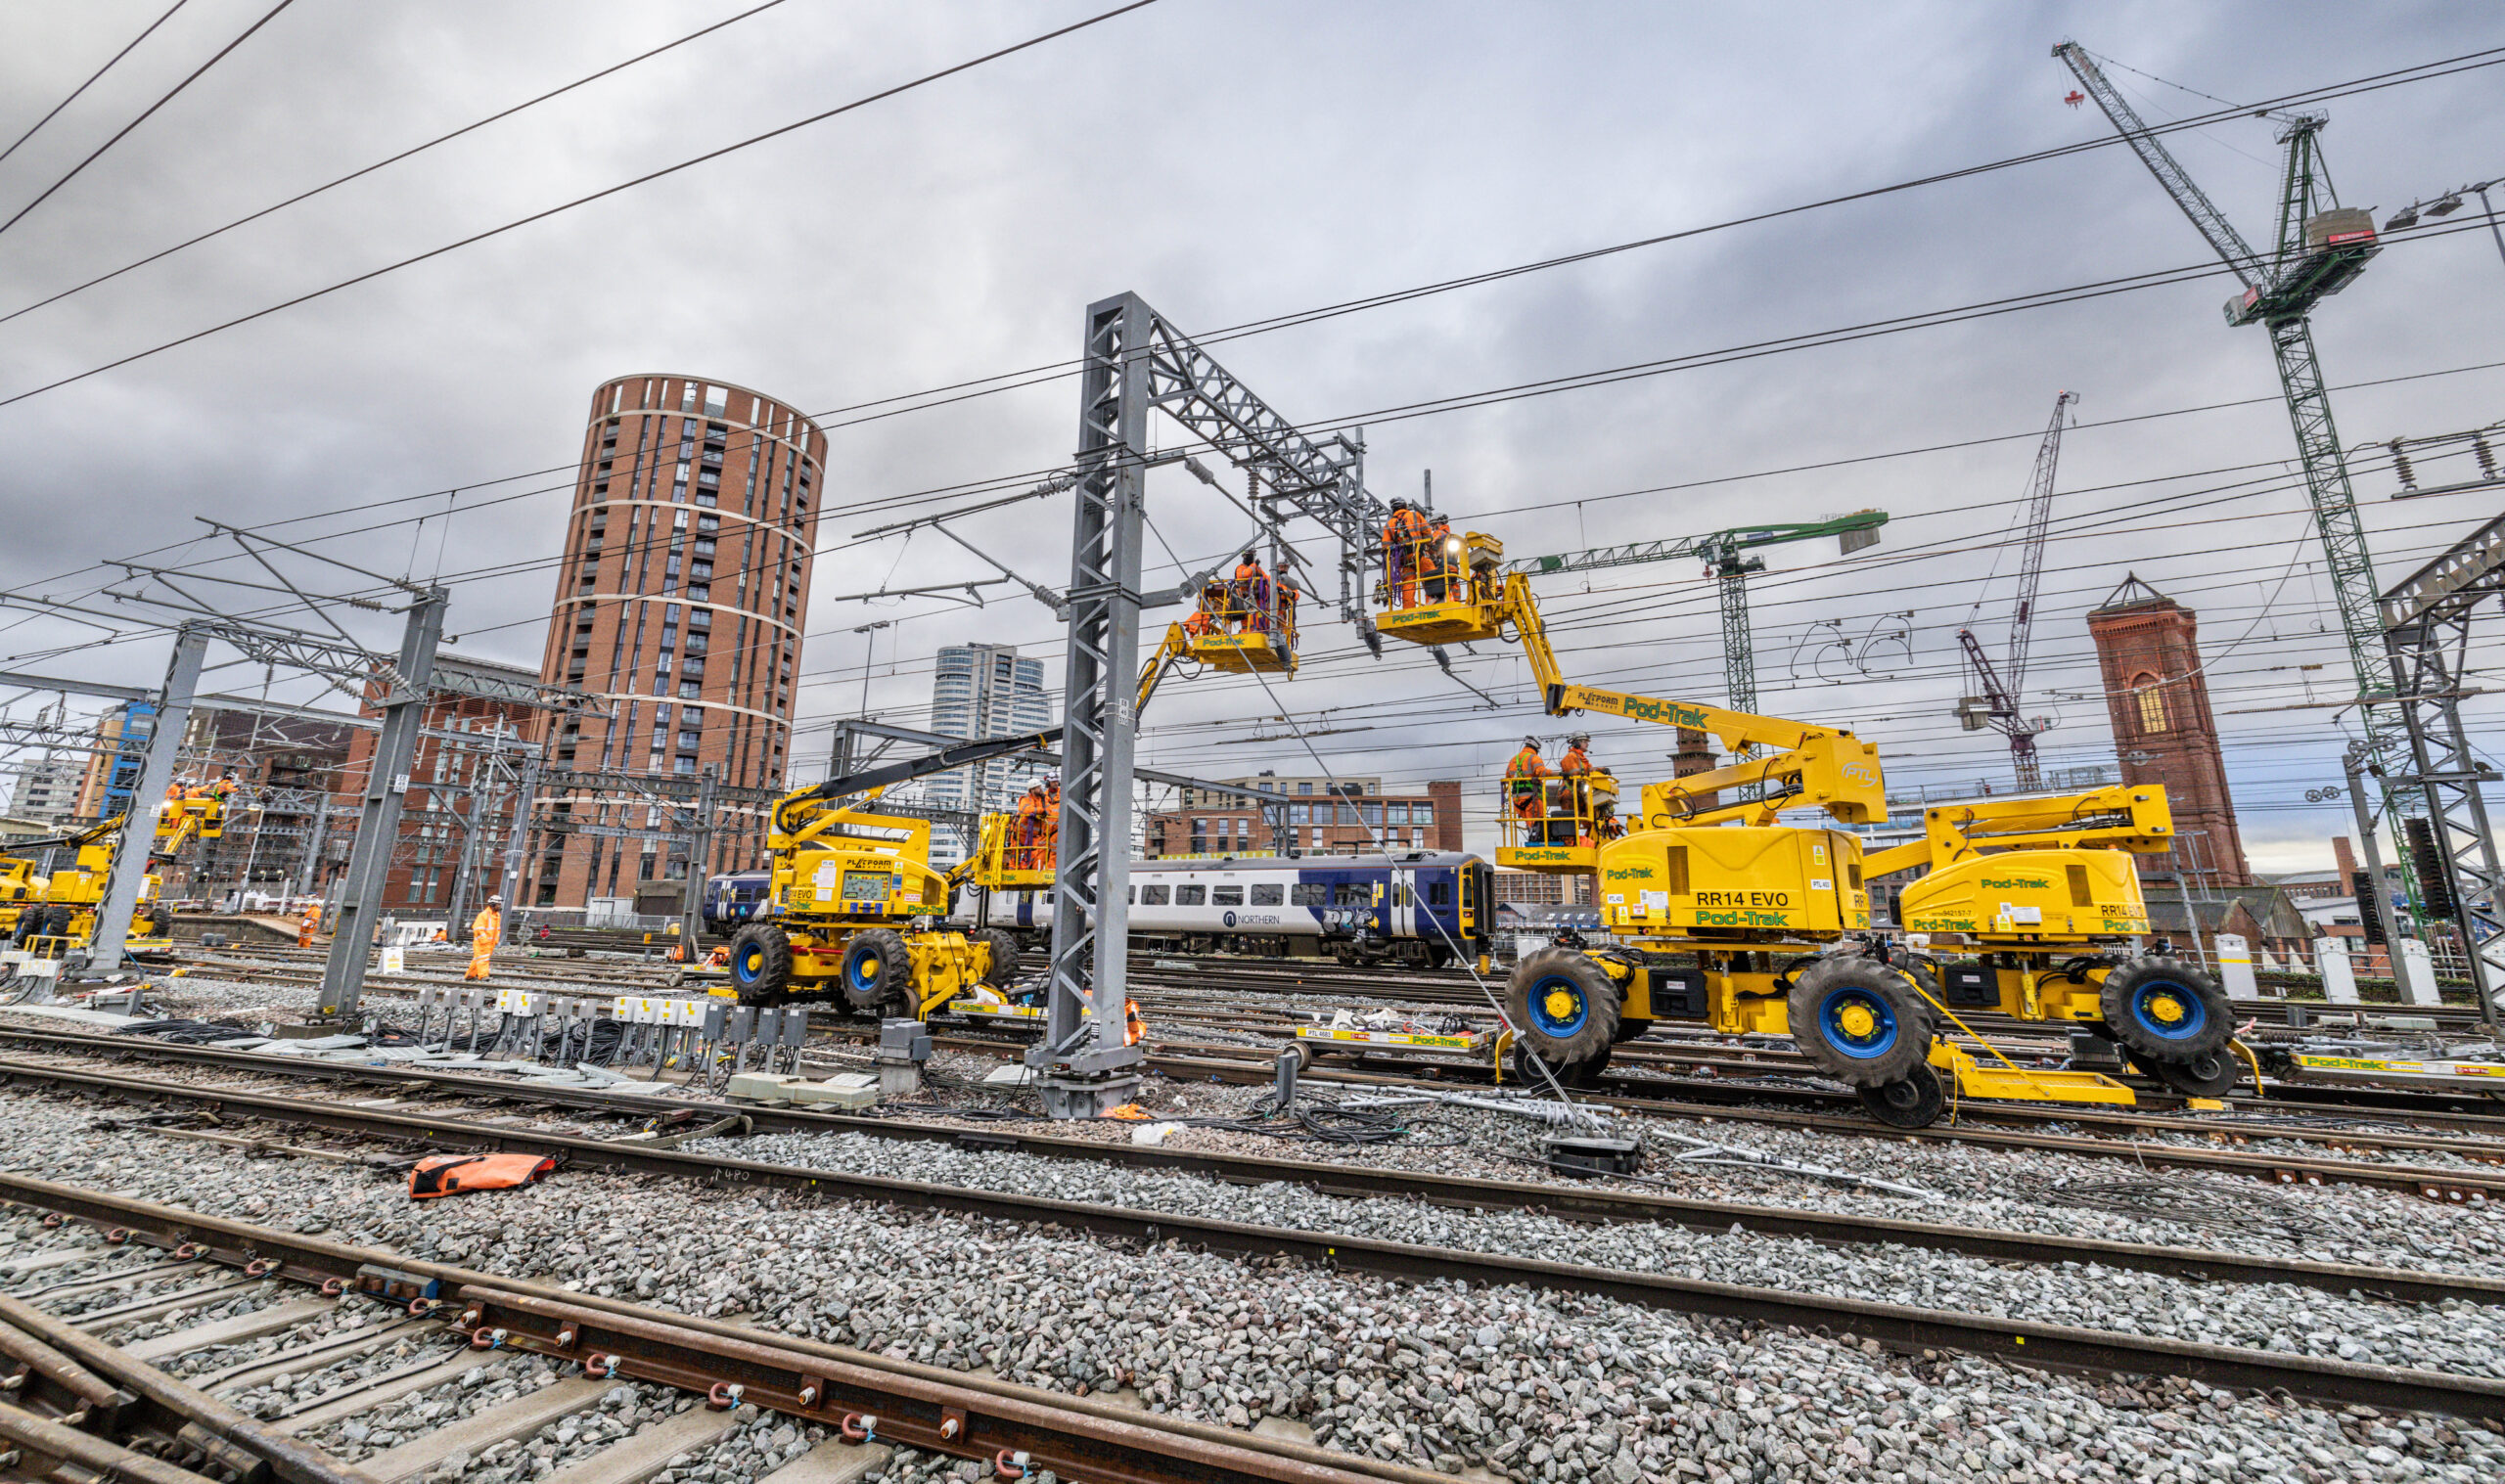 Overhead wires being installed at Leeds